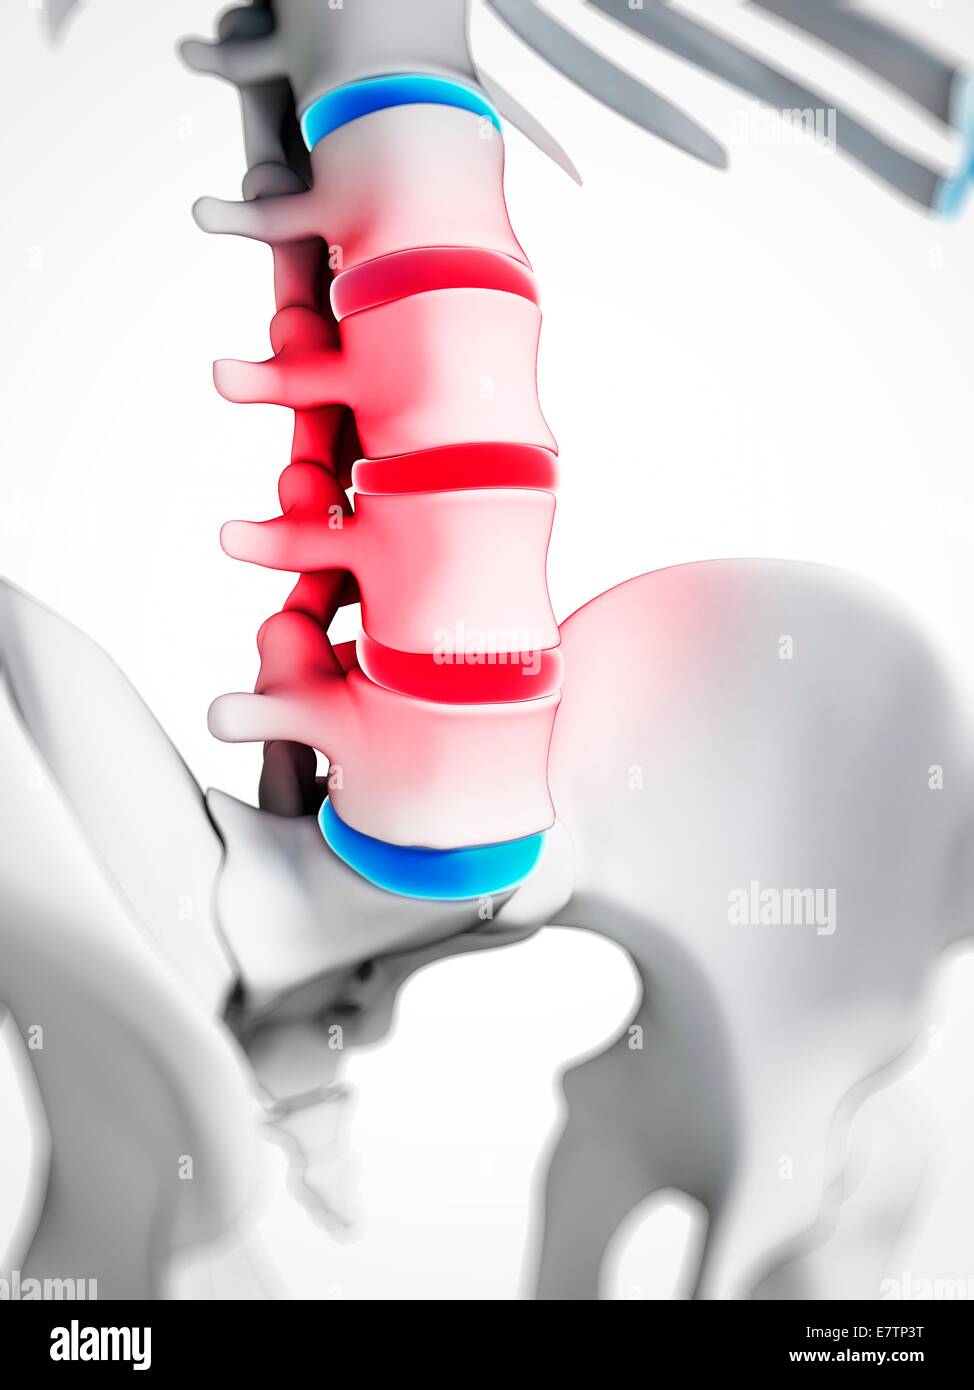 Human spinal disc herniation (slipped disc), computer artwork. Stock Photo